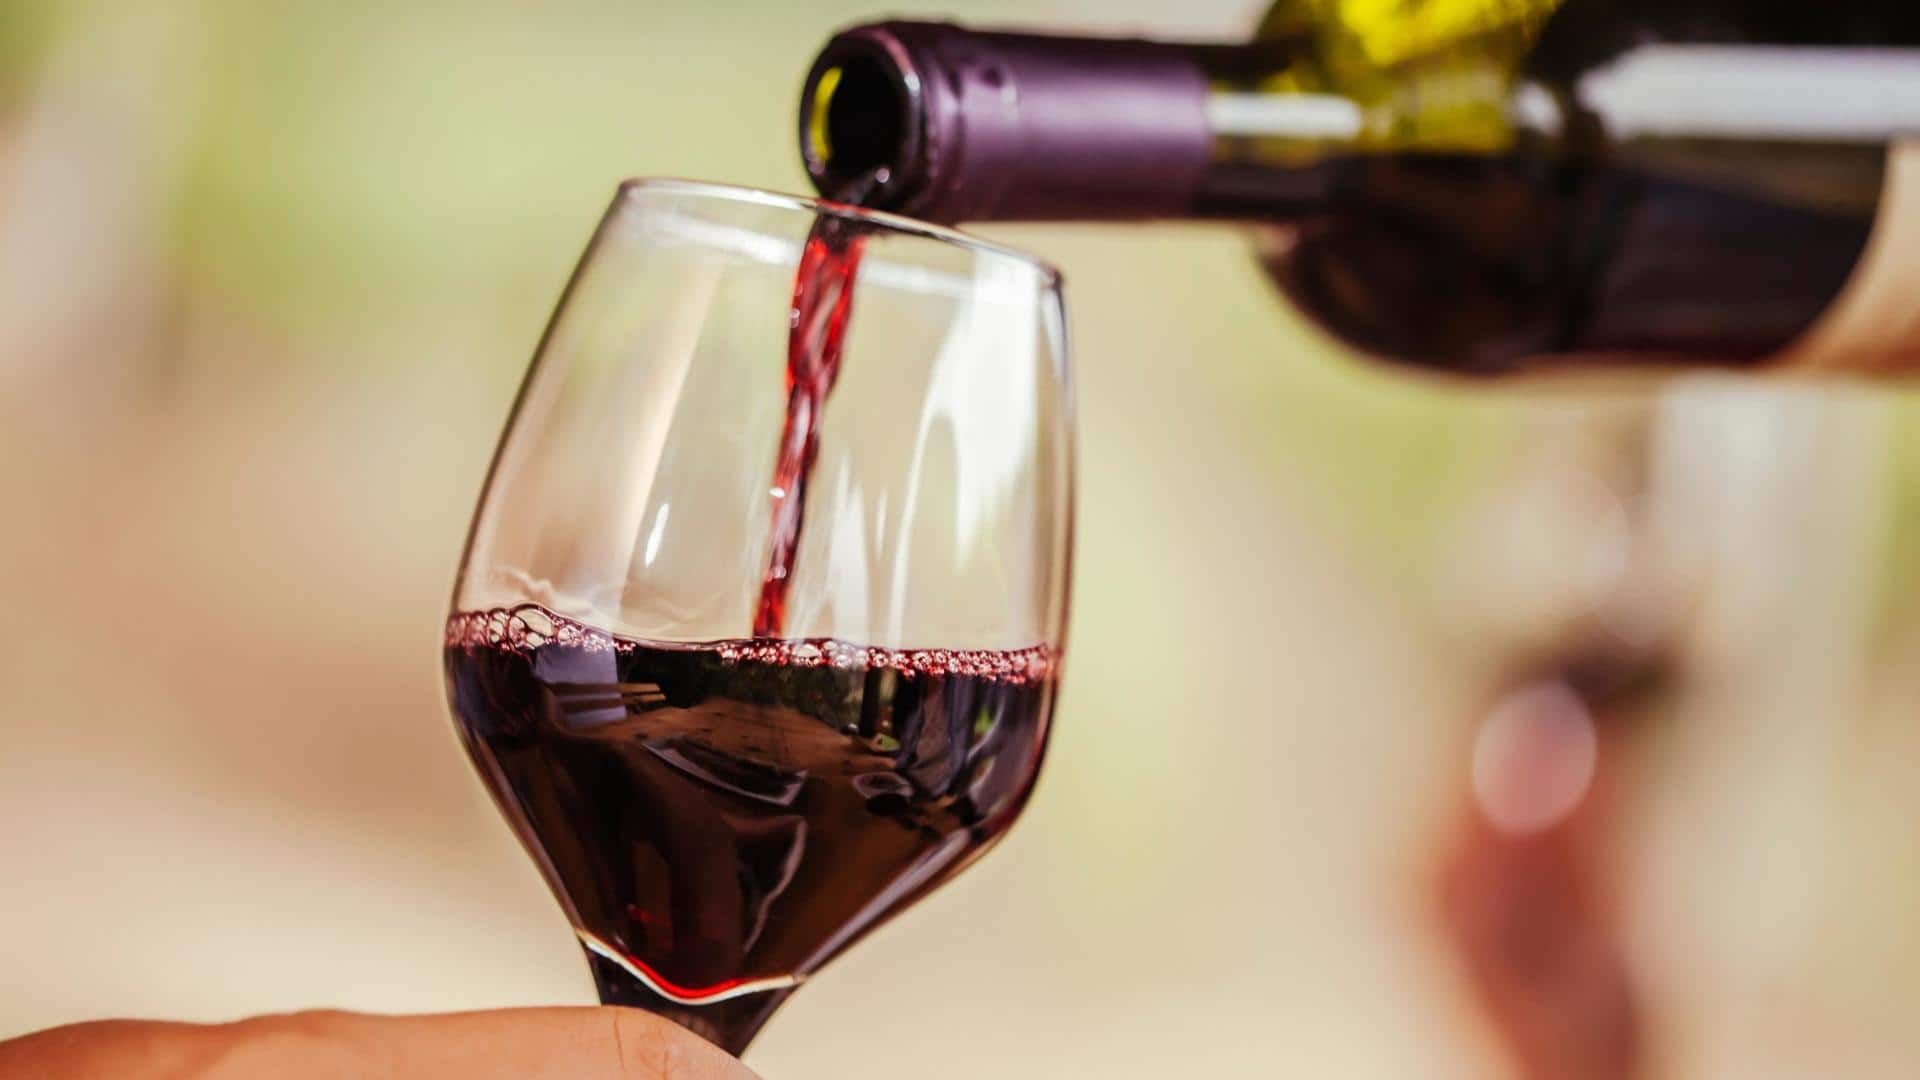 Here are the 5 astonishing health benefits of drinking wine